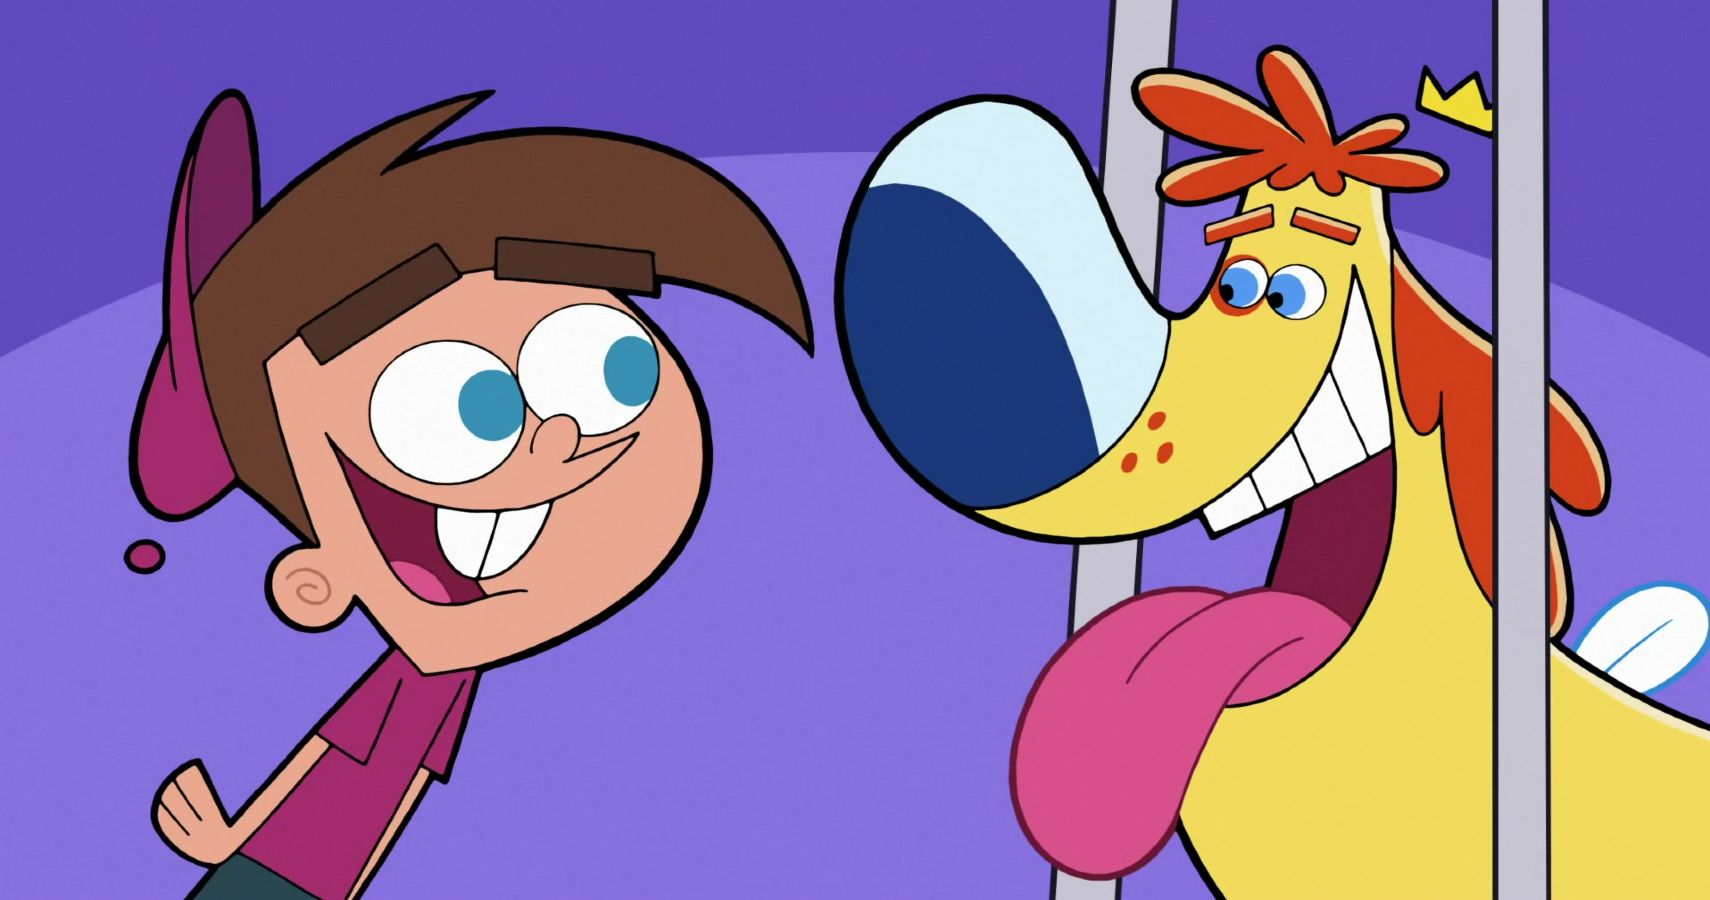 10. "The Fairly OddParents" - wide 4